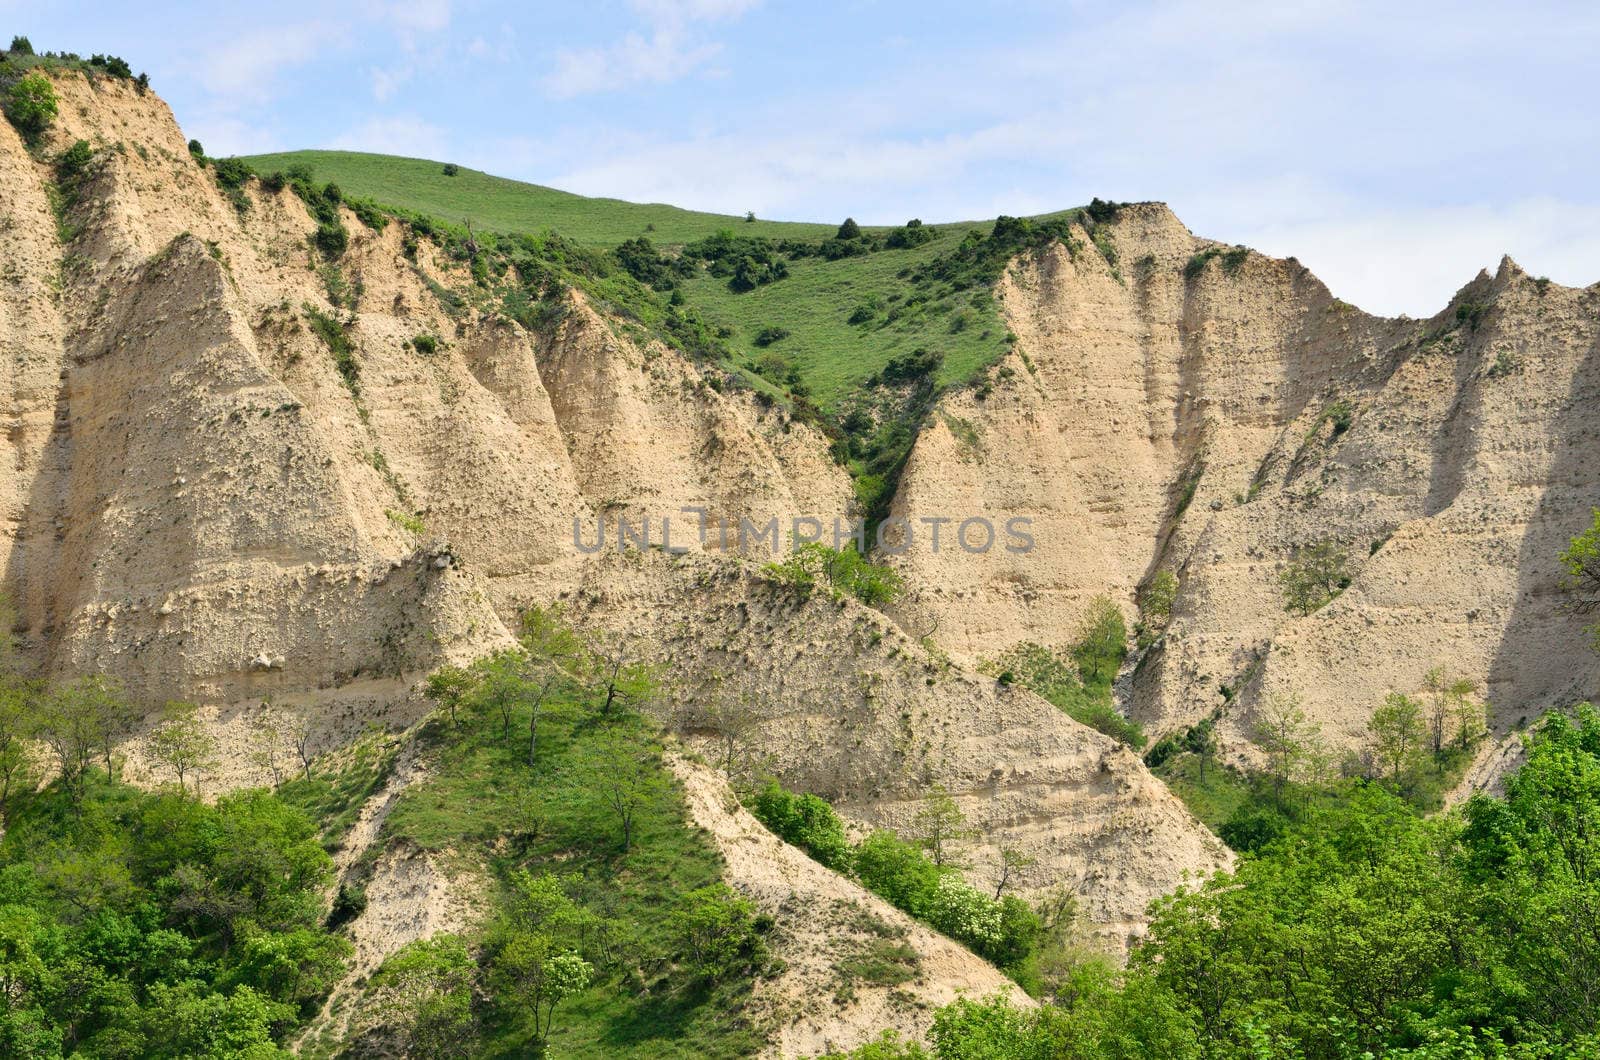 Melnik Sand Pyramids, formed by erosion caused by wind and rainfalls